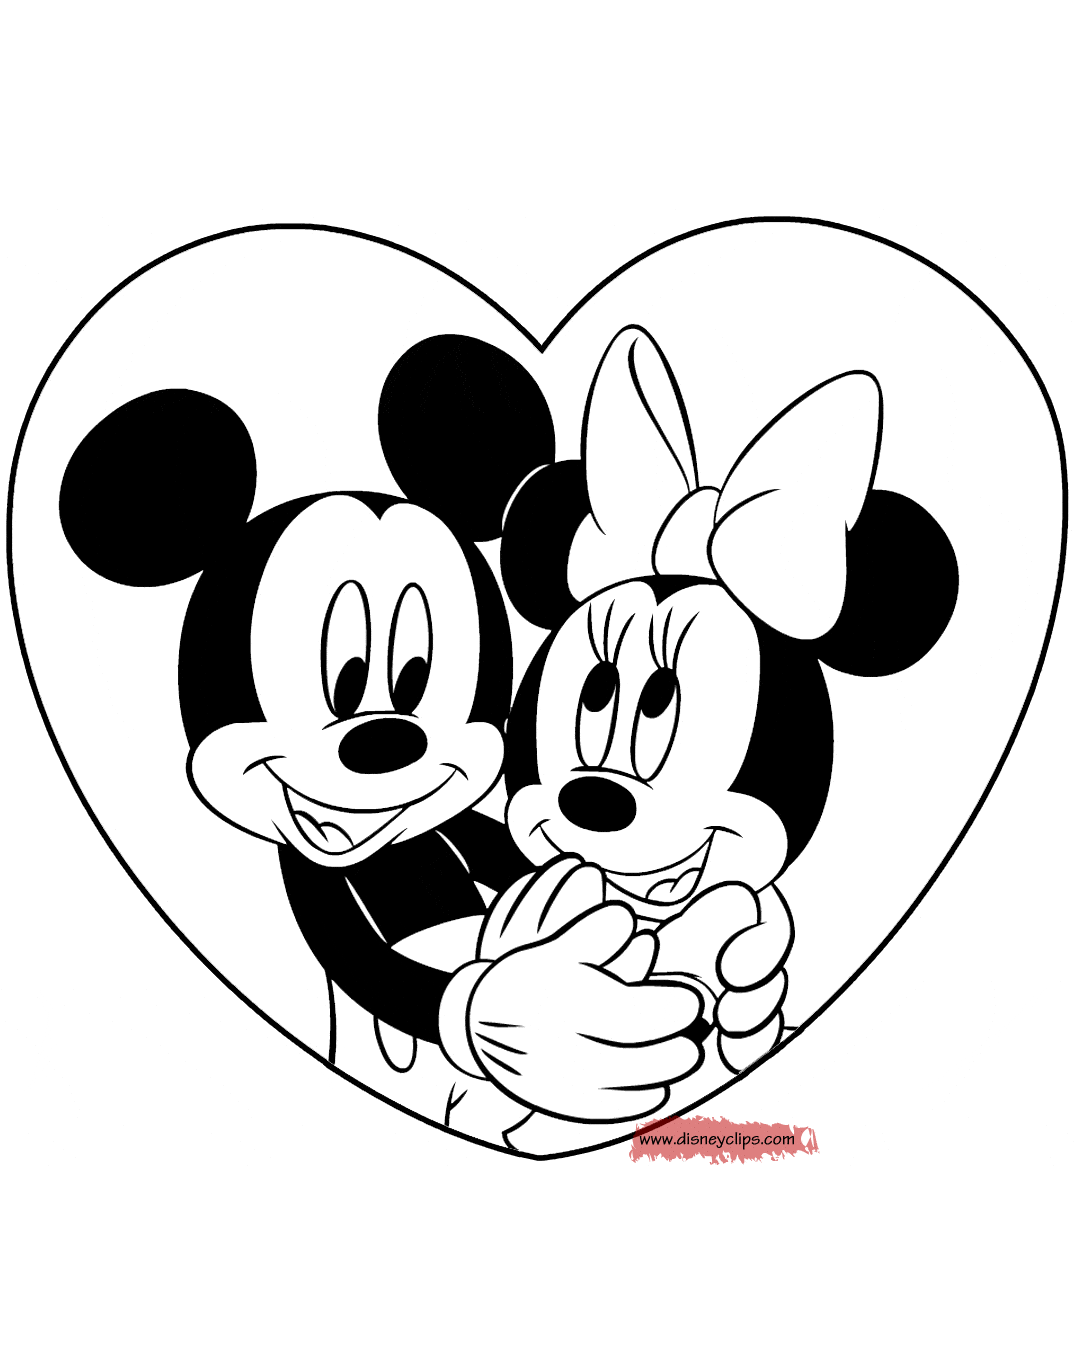 Disney Valentine's Day Coloring Pages (2)